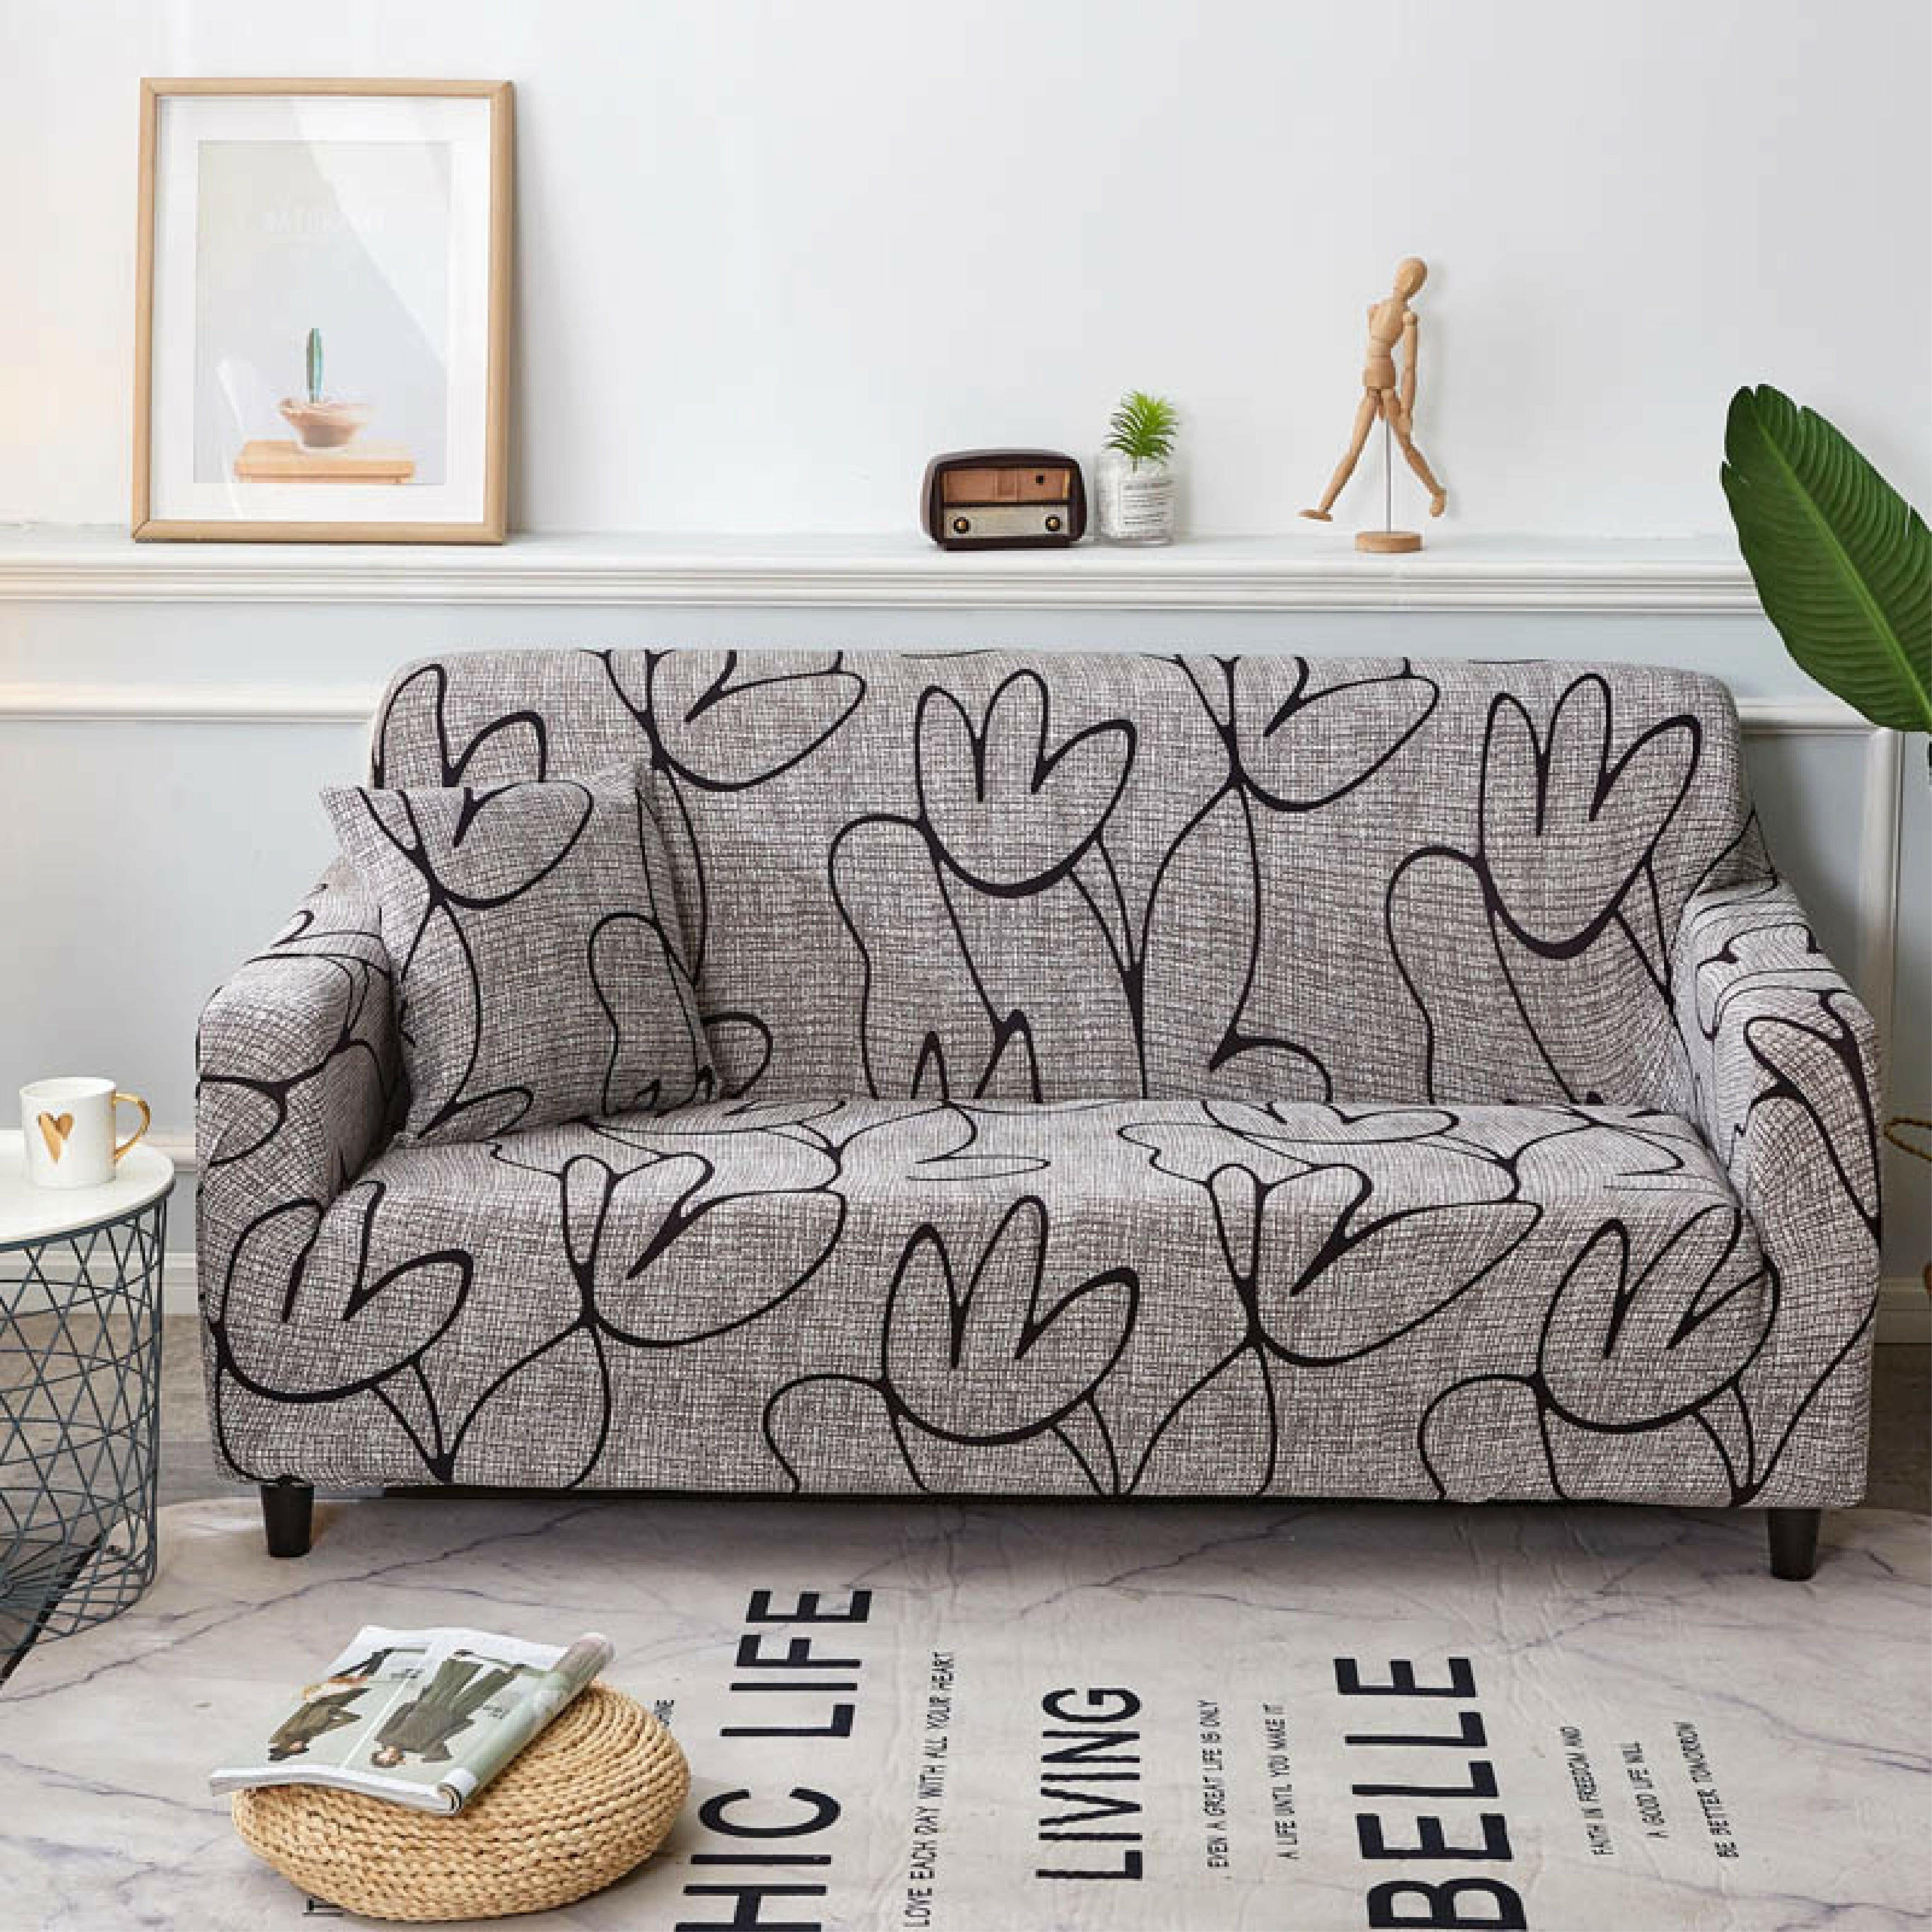 Hyper Cover Stretch Sofa Cover with Patterns Mild Lotus | Sofa Covers | Brilliant Home Living